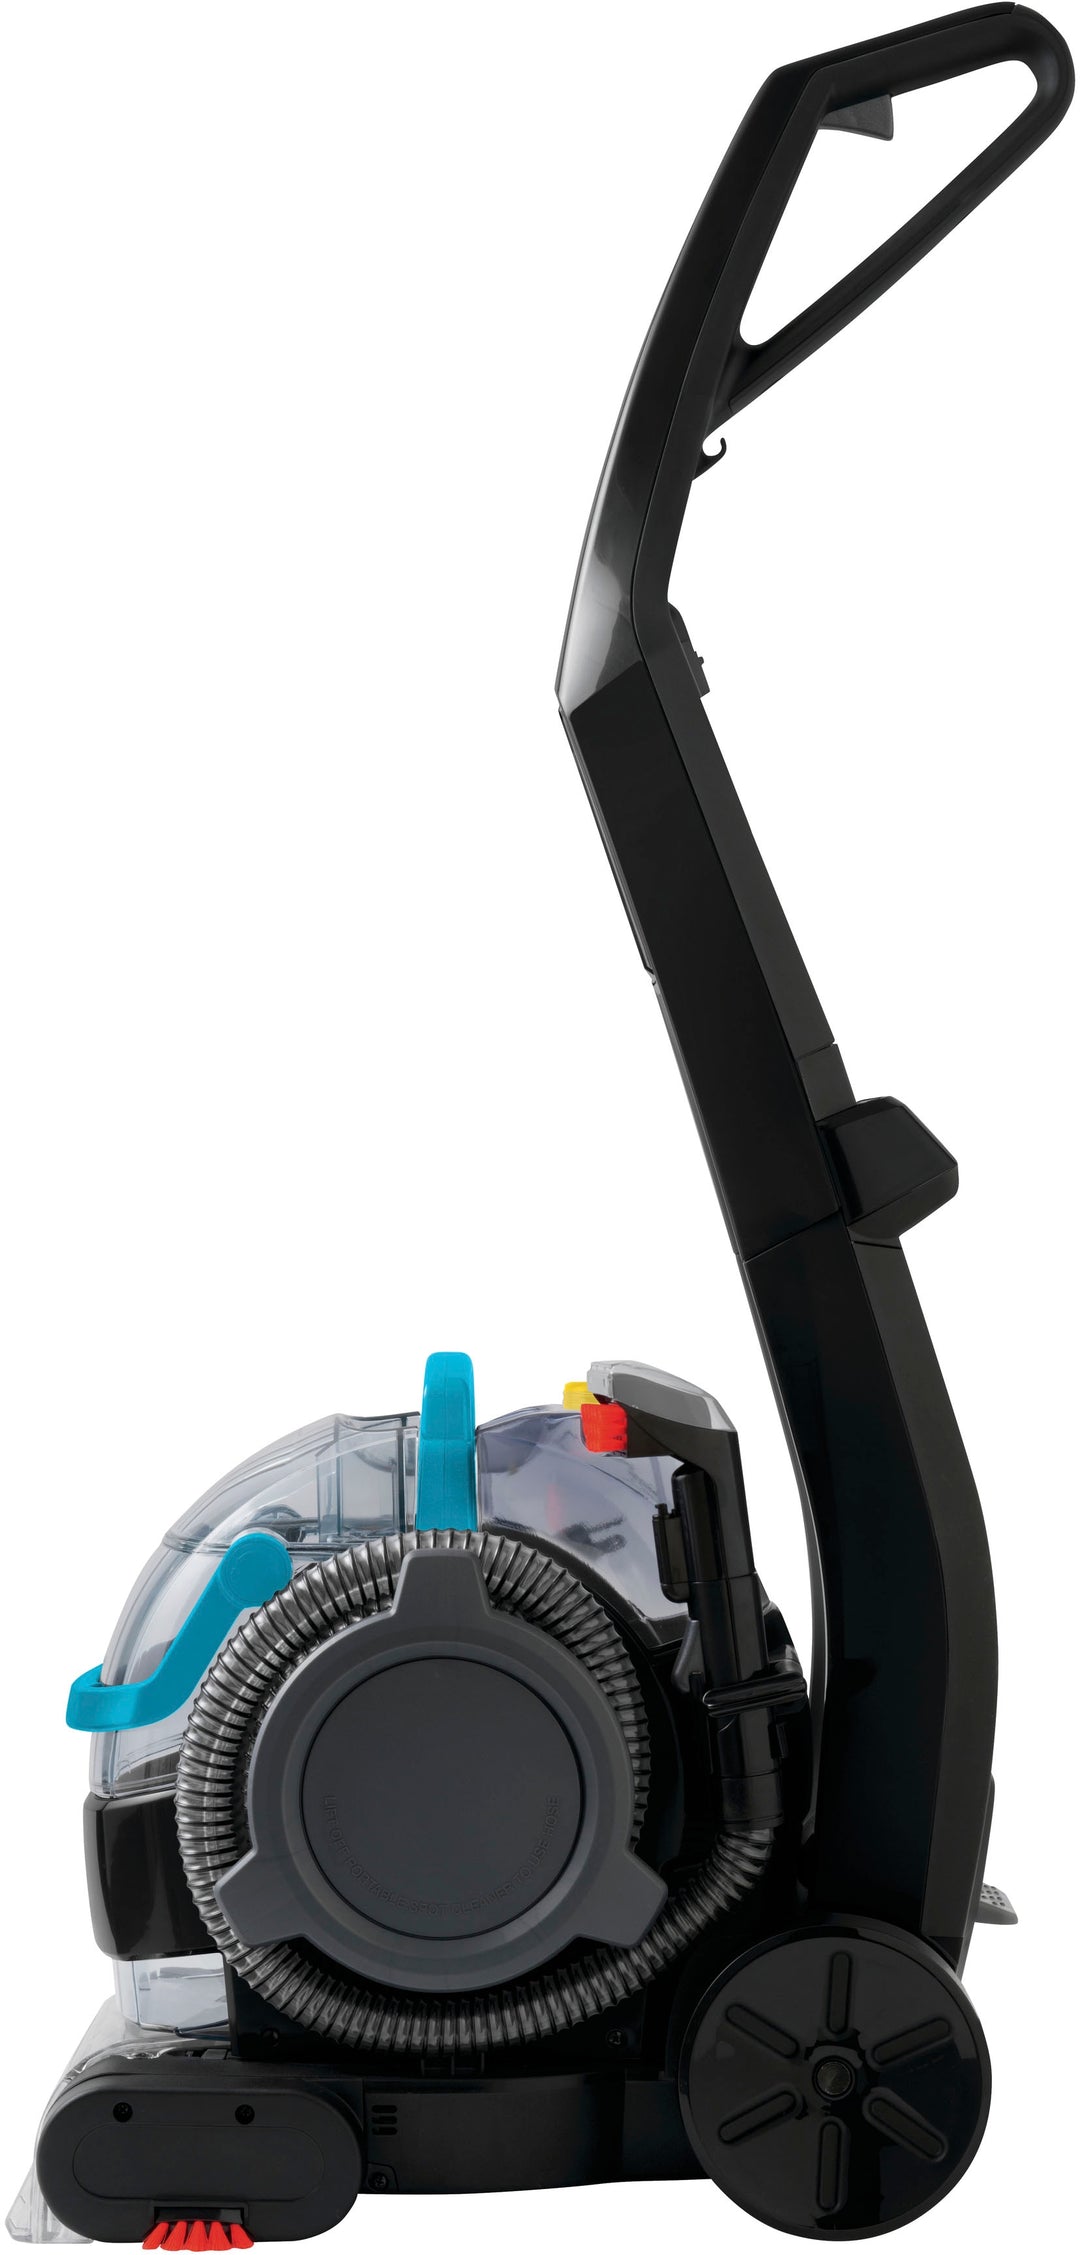 BISSELL - ProHeat 2X Lift-Off  Upright Deep Cleaner - Titanium and Teal_2